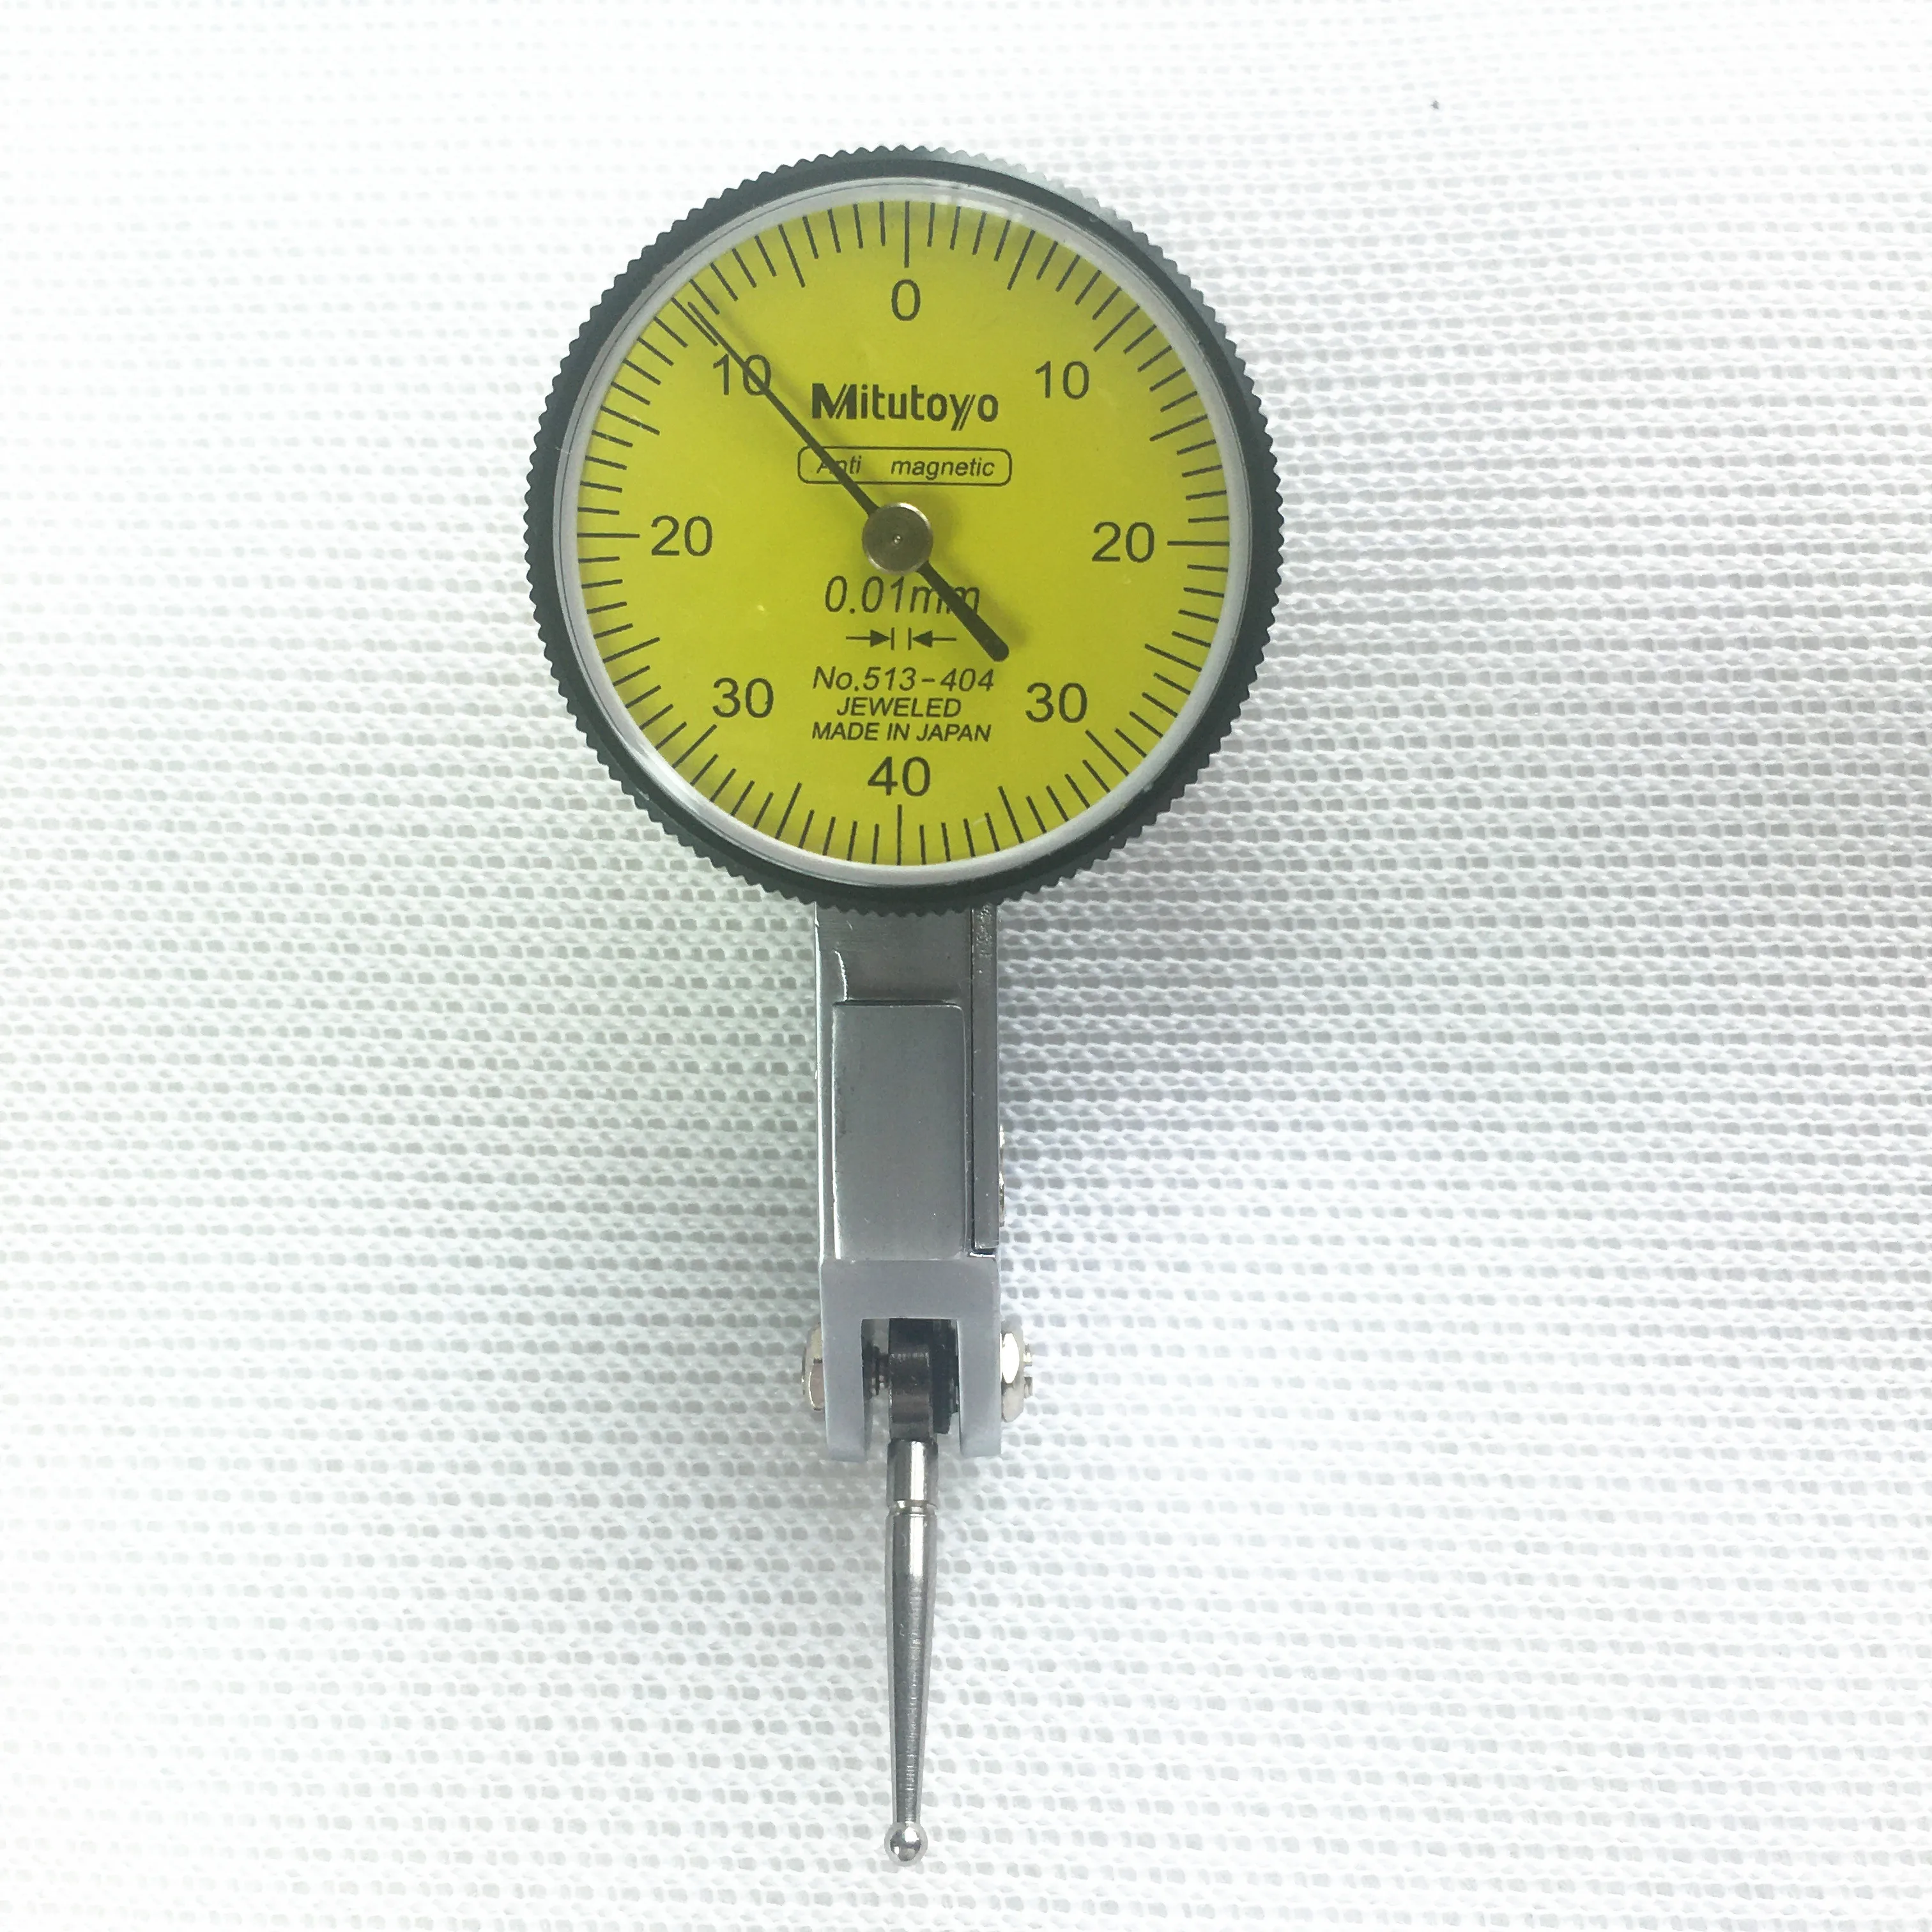 Precision tool Mitutoyo Dial Test Indicator 0-0.8mm 513-404 0.01mm lever Gauge 